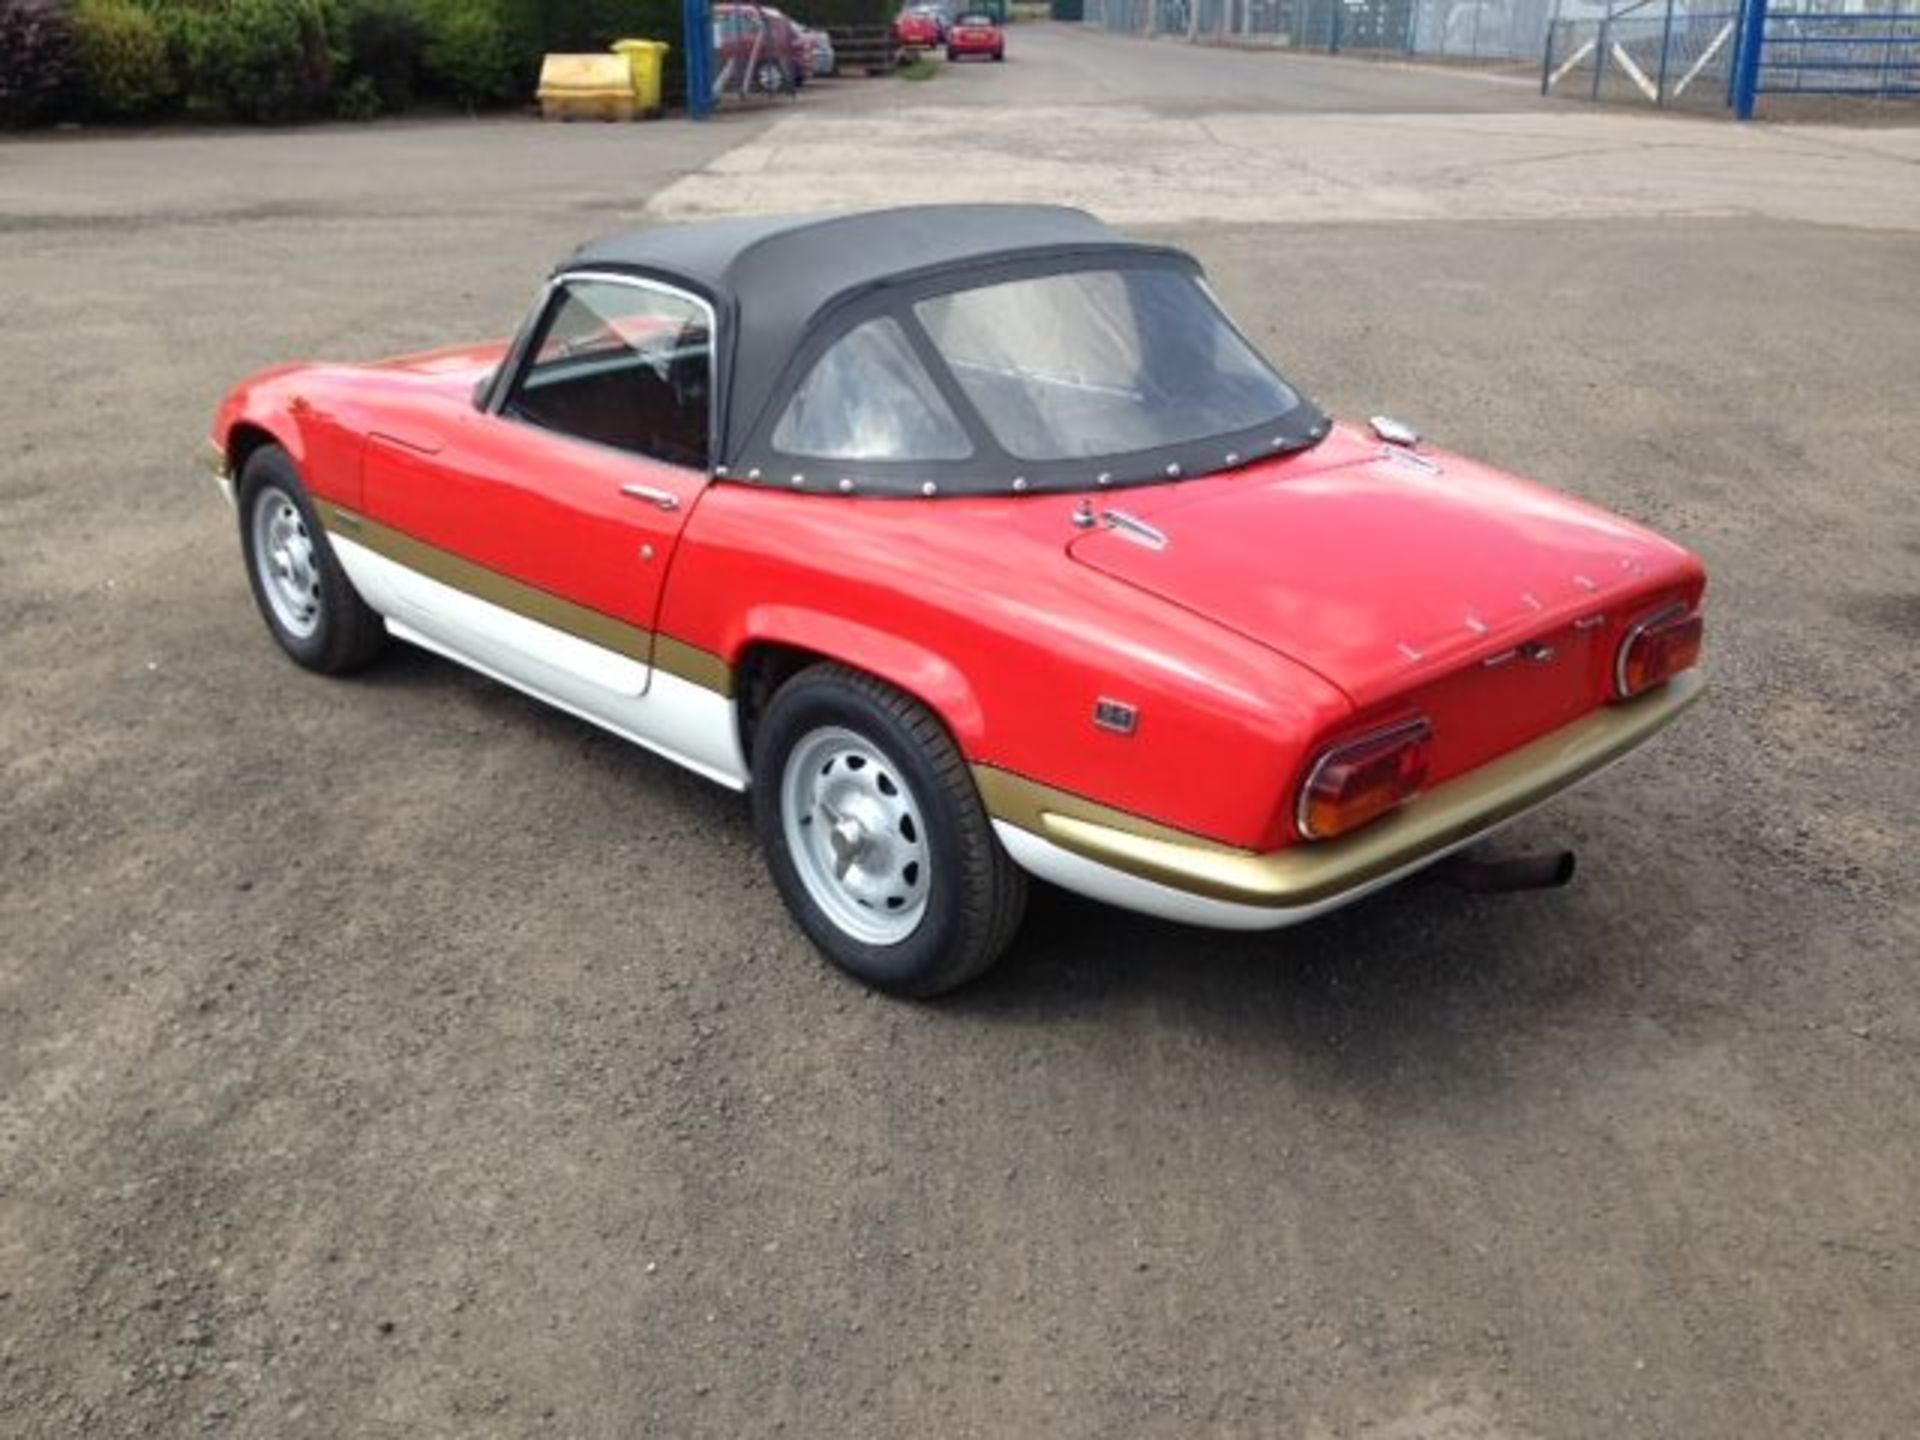 LOTUS, ELAN SERIES 4 - 1588cc, Chassis number 7002050018C - presented with an MOT test certificate - Image 5 of 7